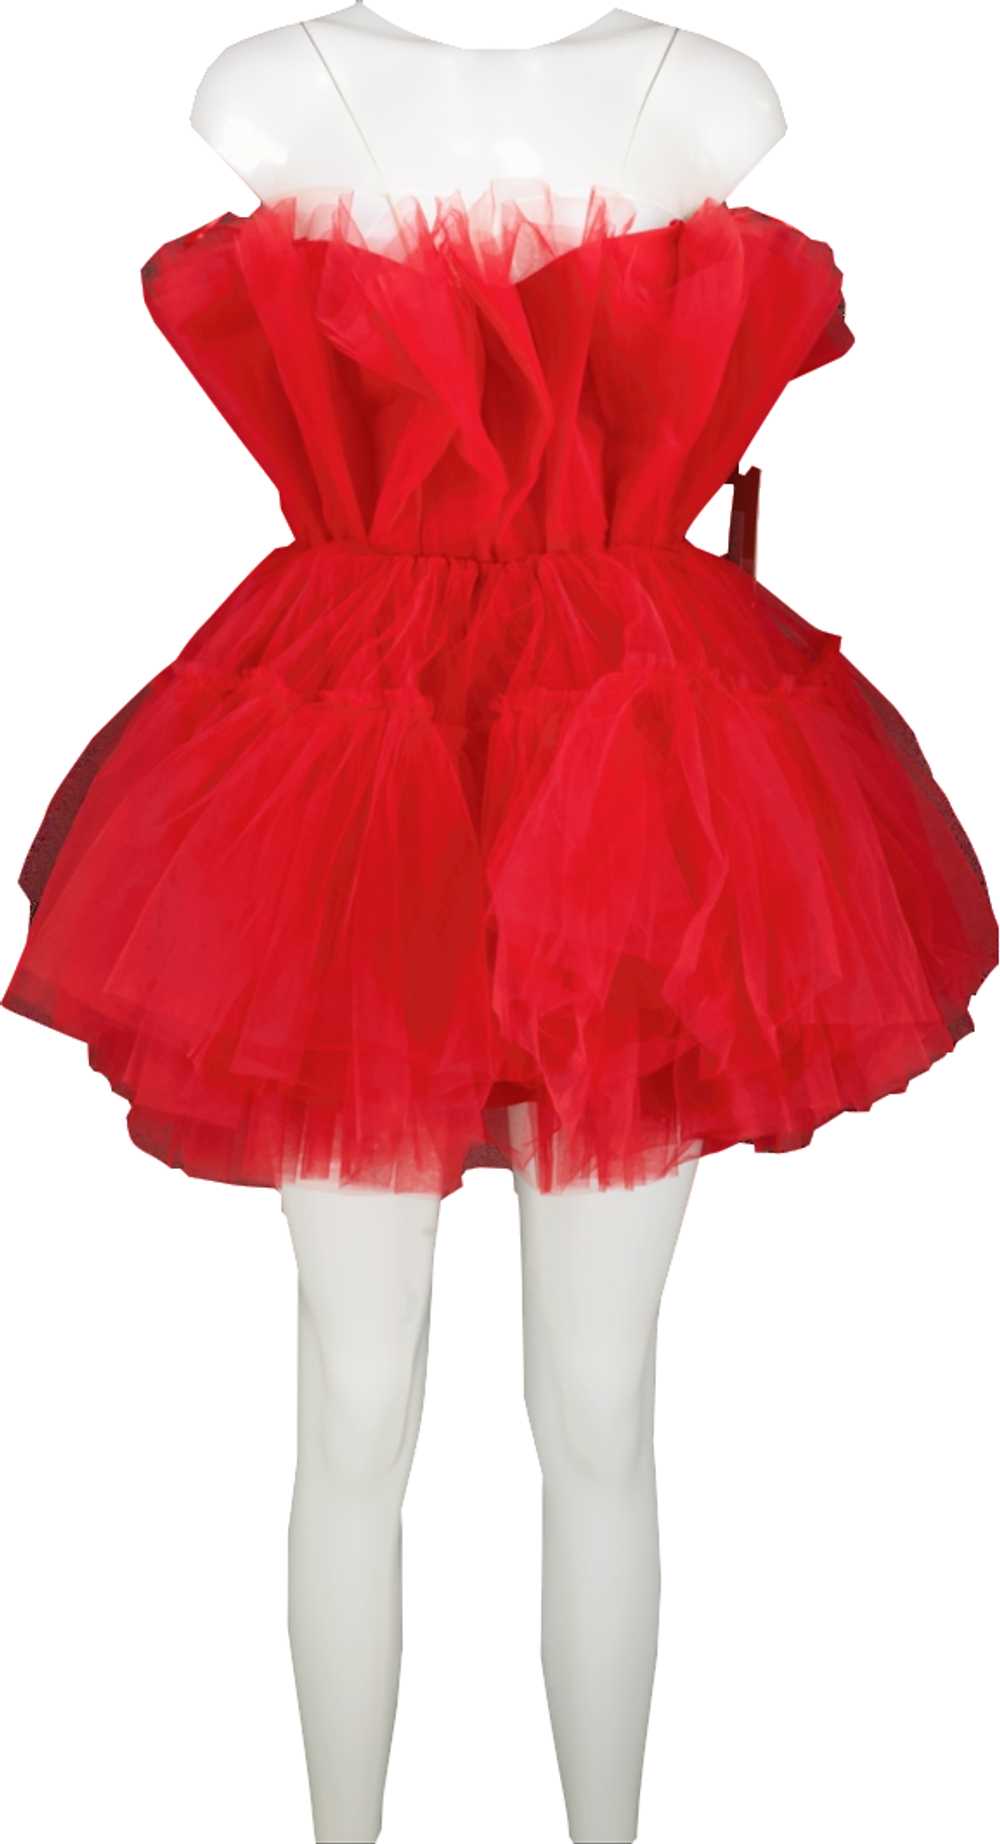 From A Friend Red Tulle Tutu Mini Dress UK XS/S - image 1